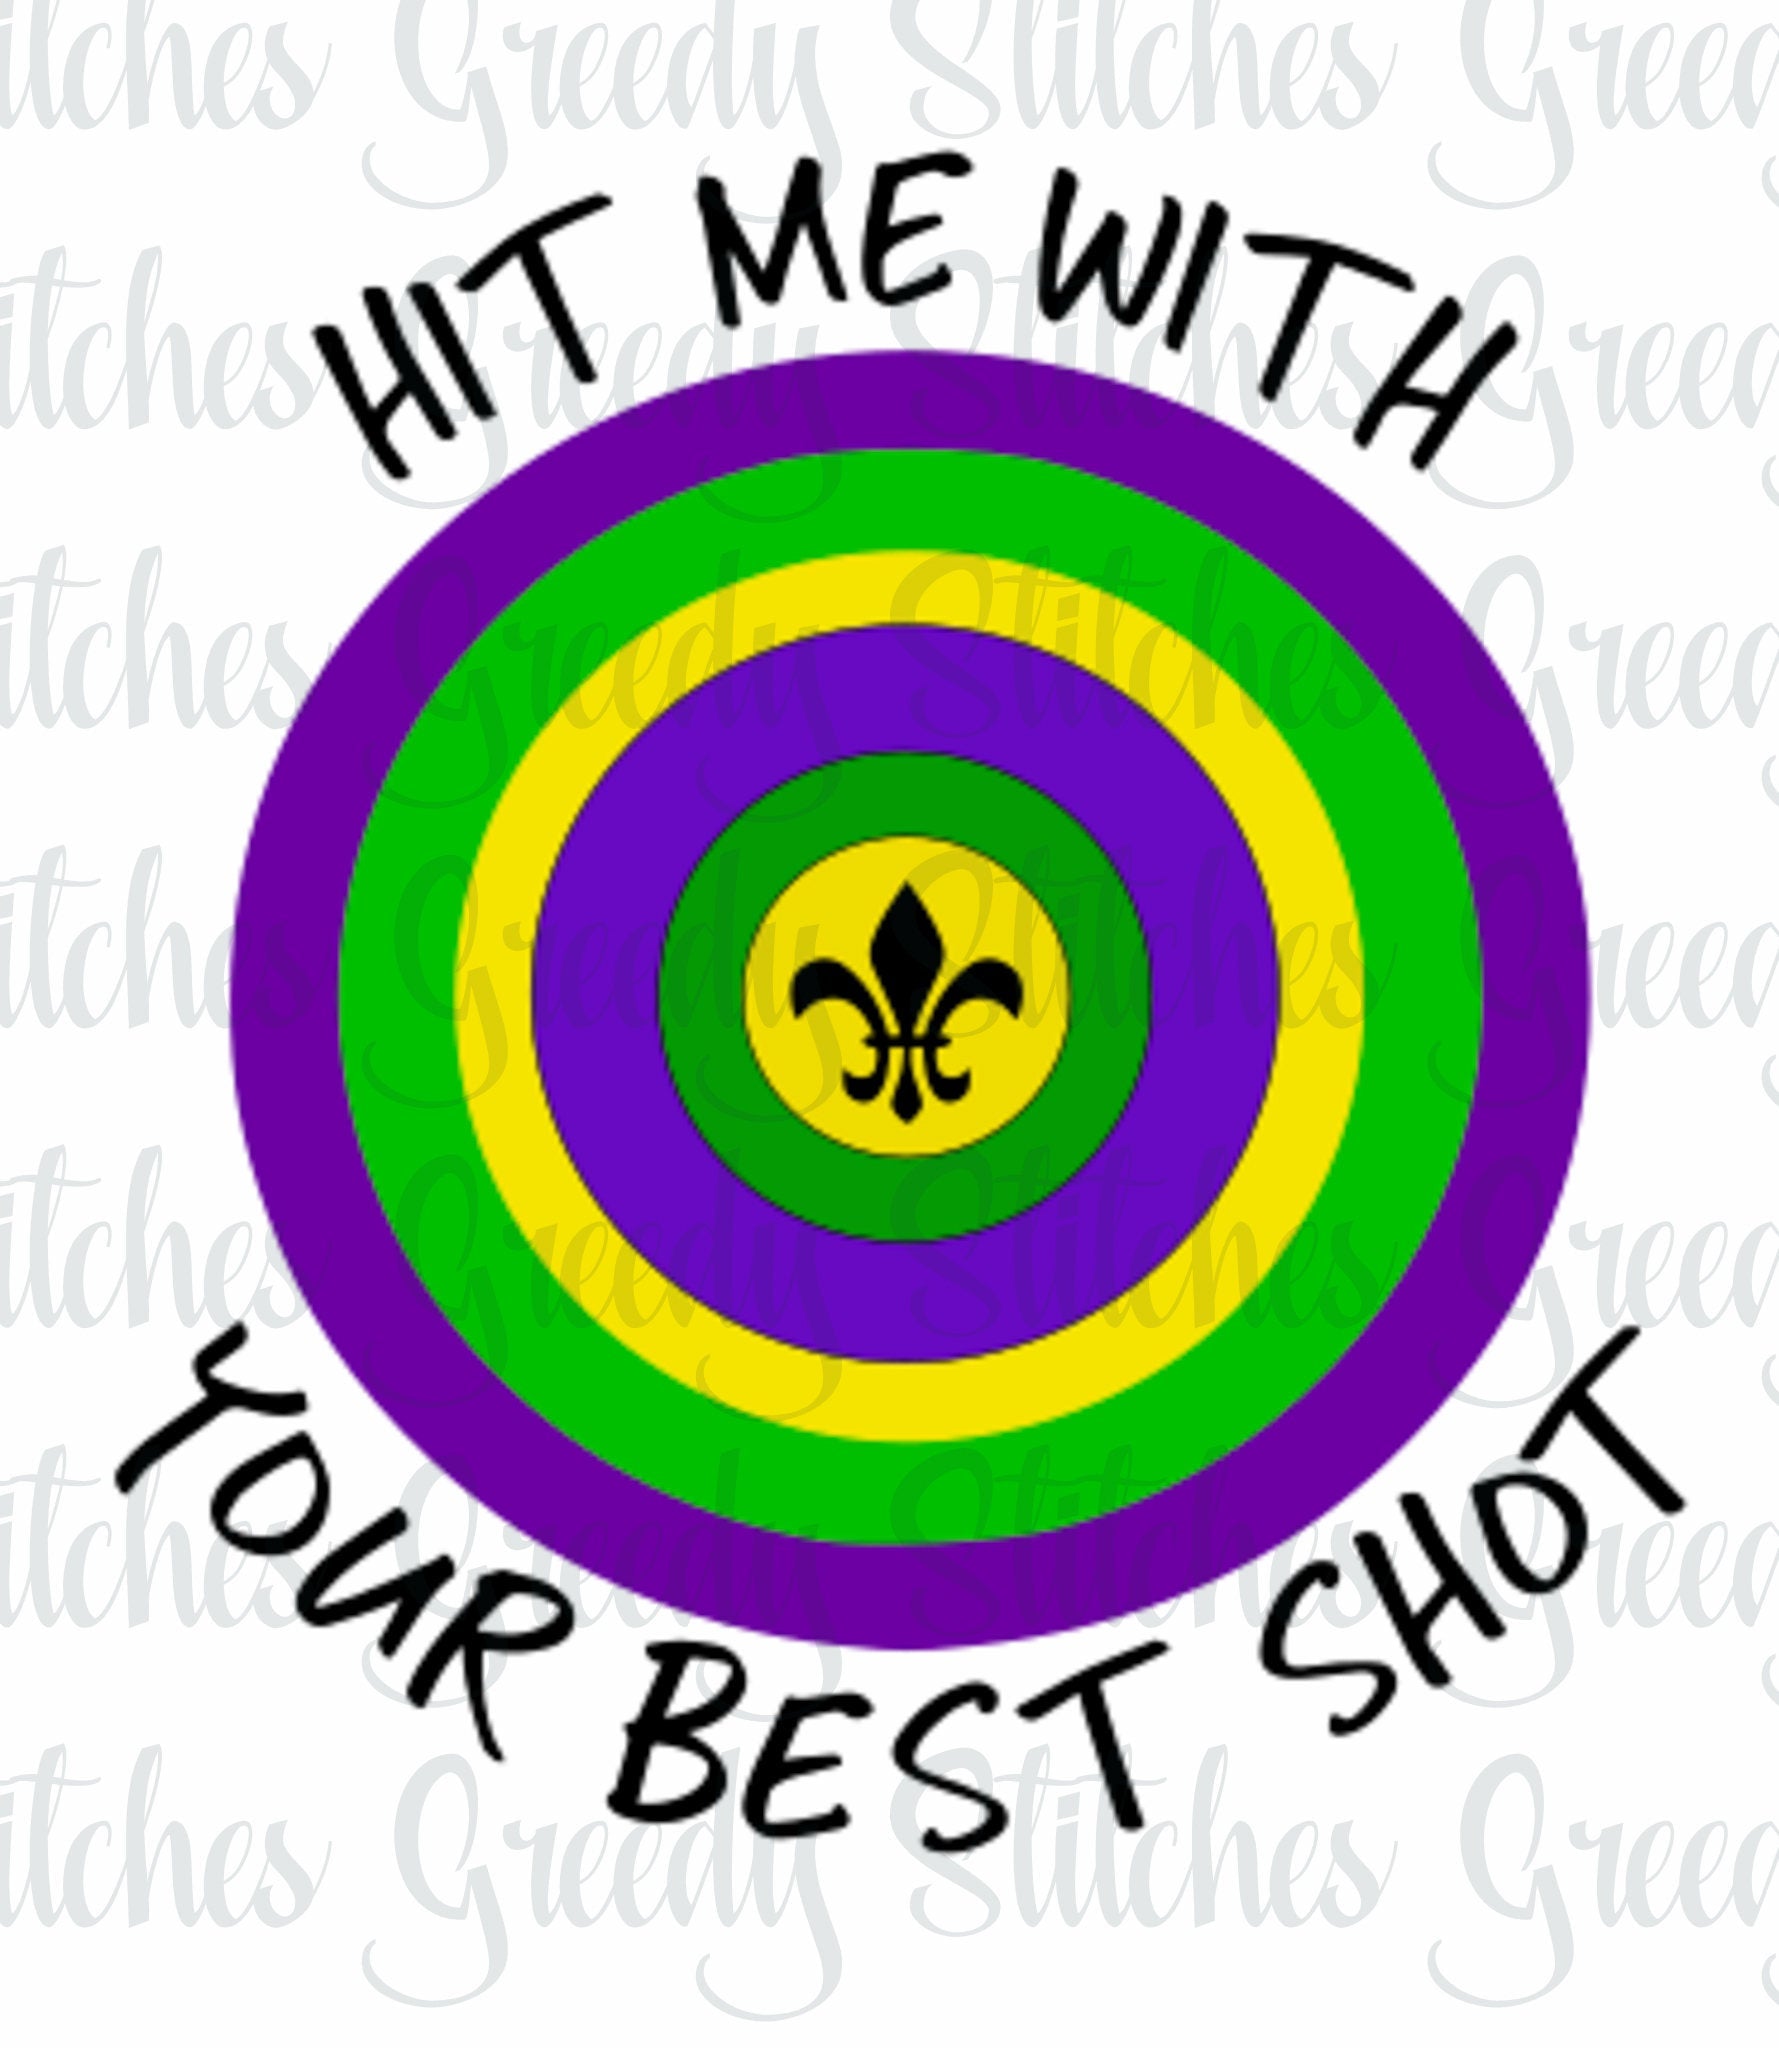 Mardi Gras SvG | Hit Me With Your Best Shot svg dxf eps png. Mardi Gras Bulls Eye SVG | Bulls Eye SvG | Instant Download Cut Files